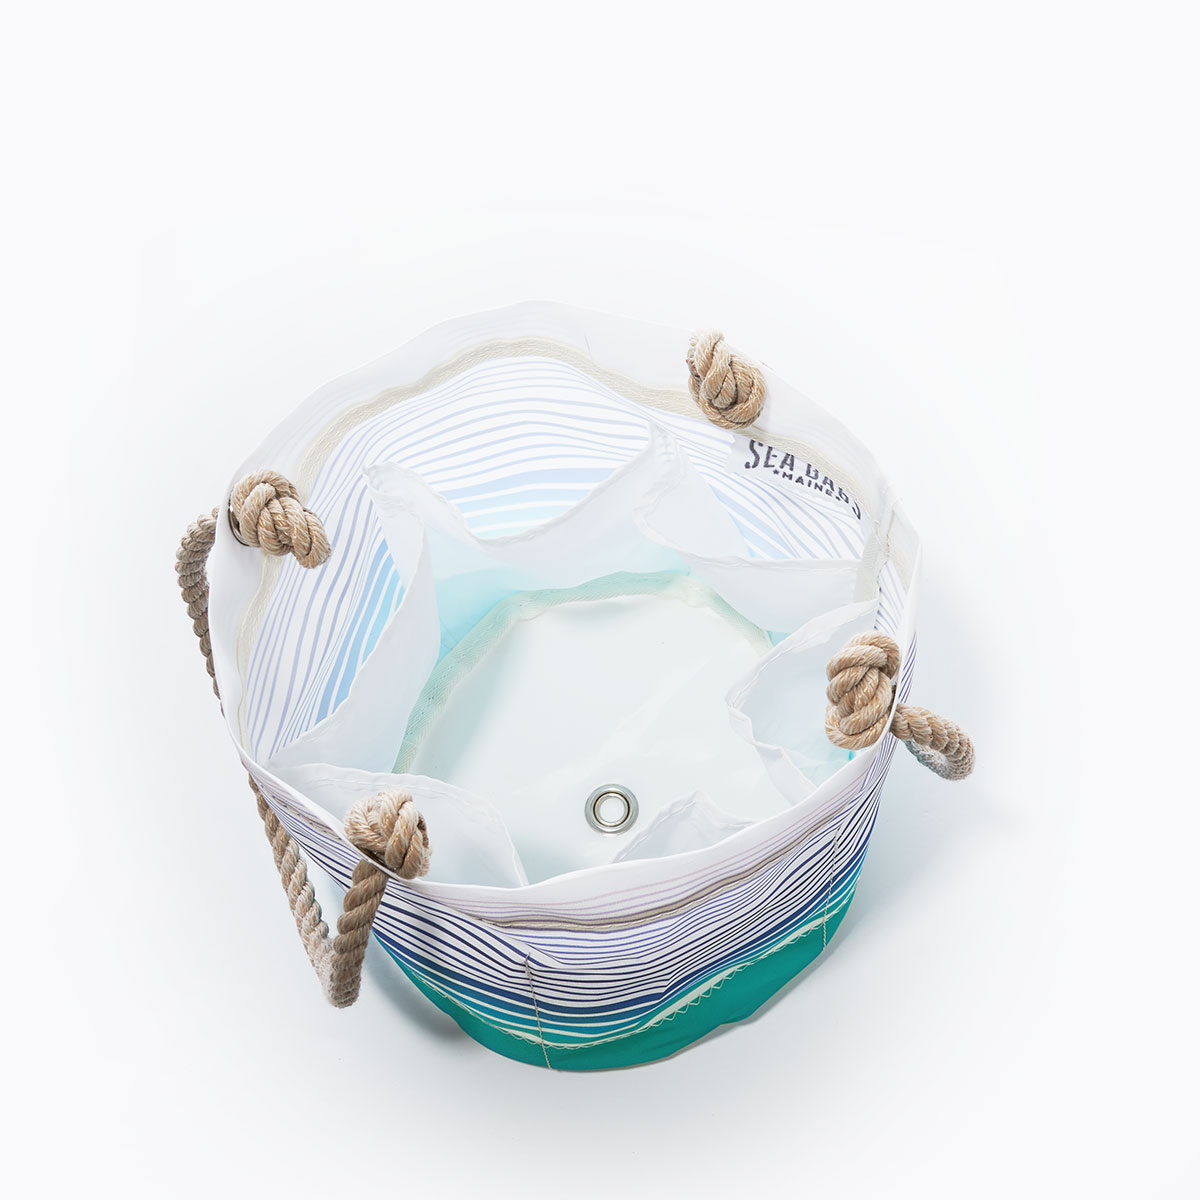 inside view with bottle pockets and bottom grommet of a recycled sail cloth beverage bucket with hemp rope handles is printed with ombre stripes of blue into green with a solid green bottom